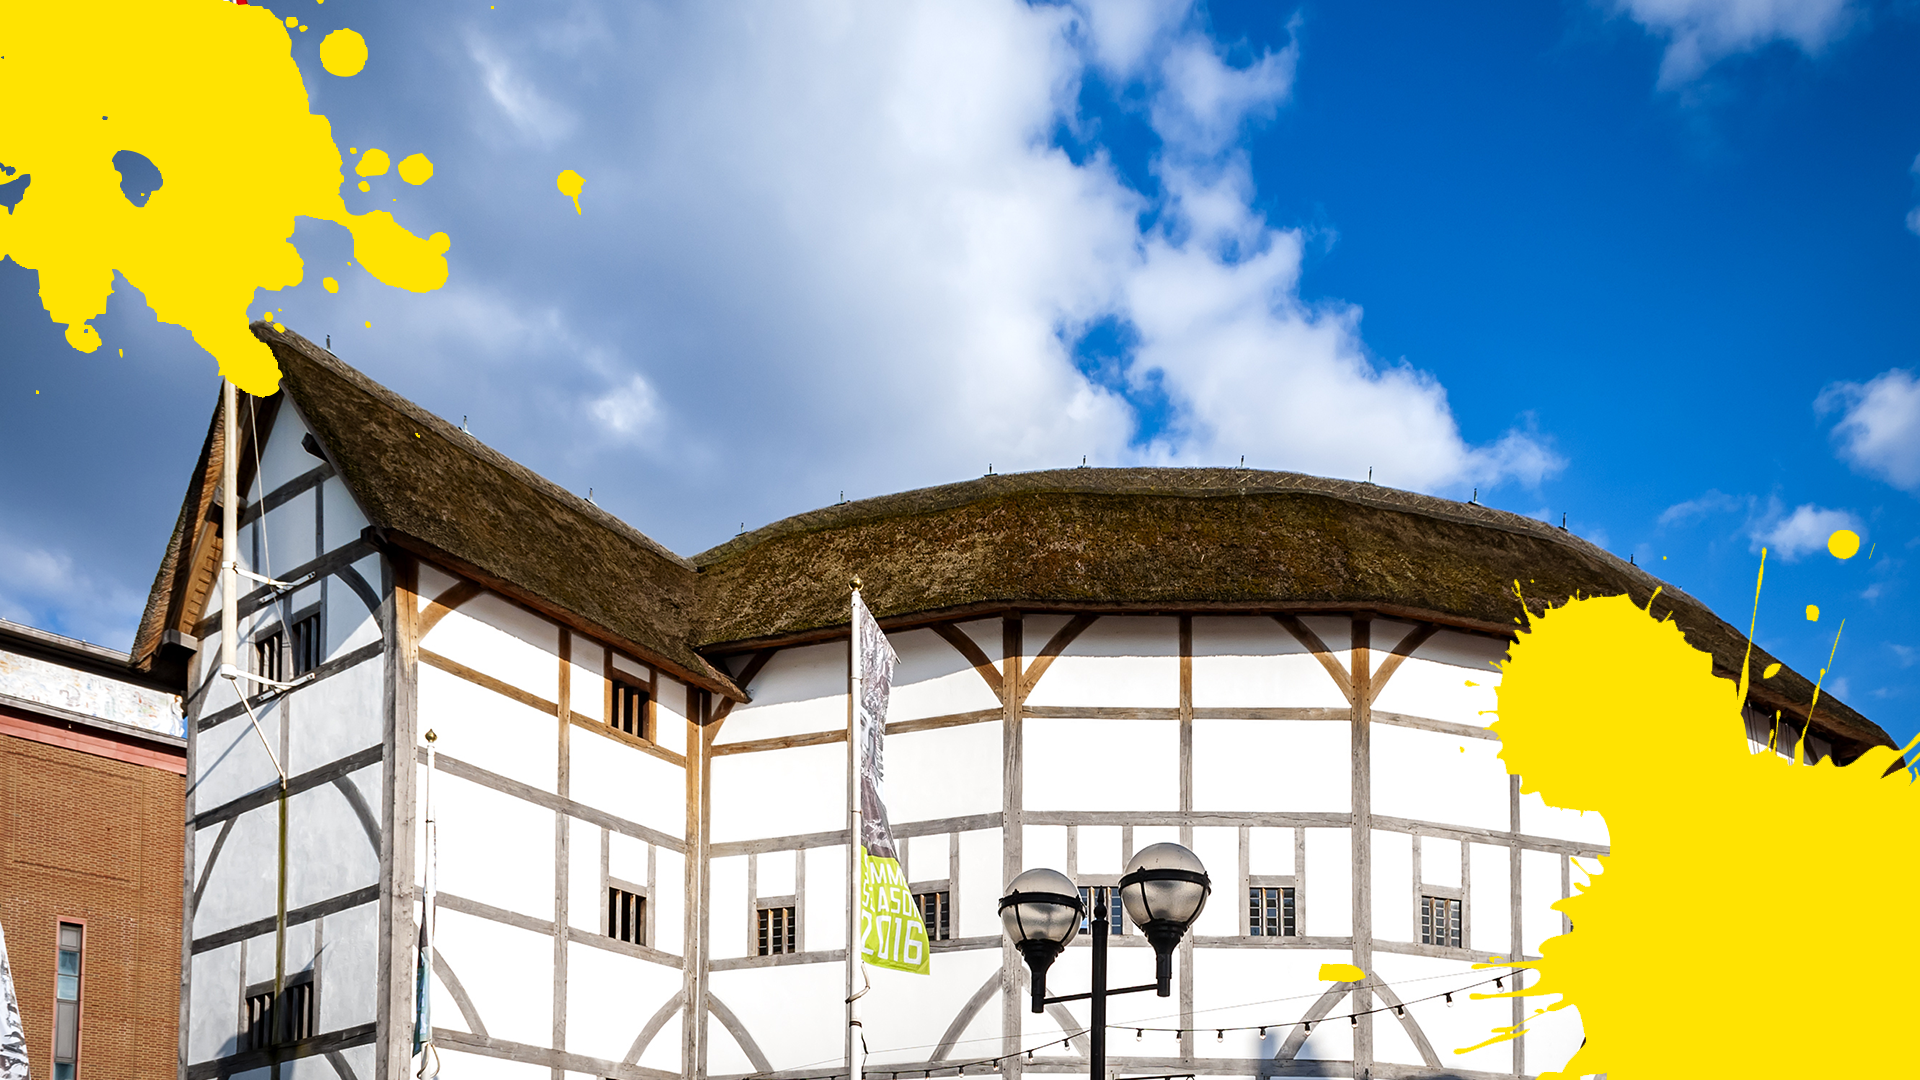 The globe theatre and some yellow splats